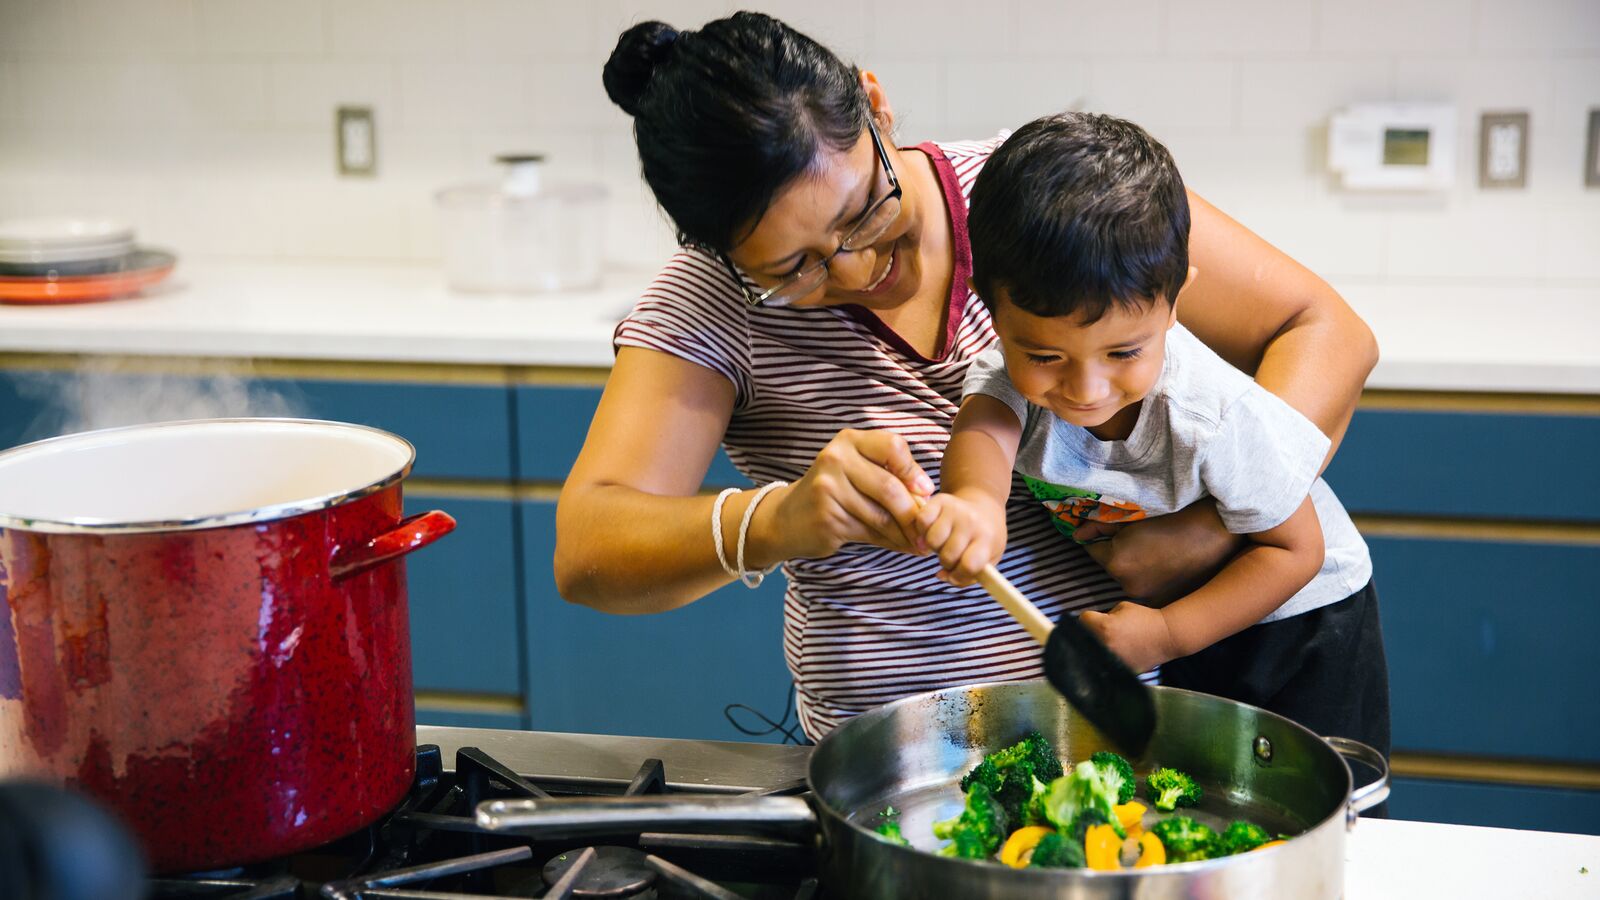 A woman cooks vegetables with her child